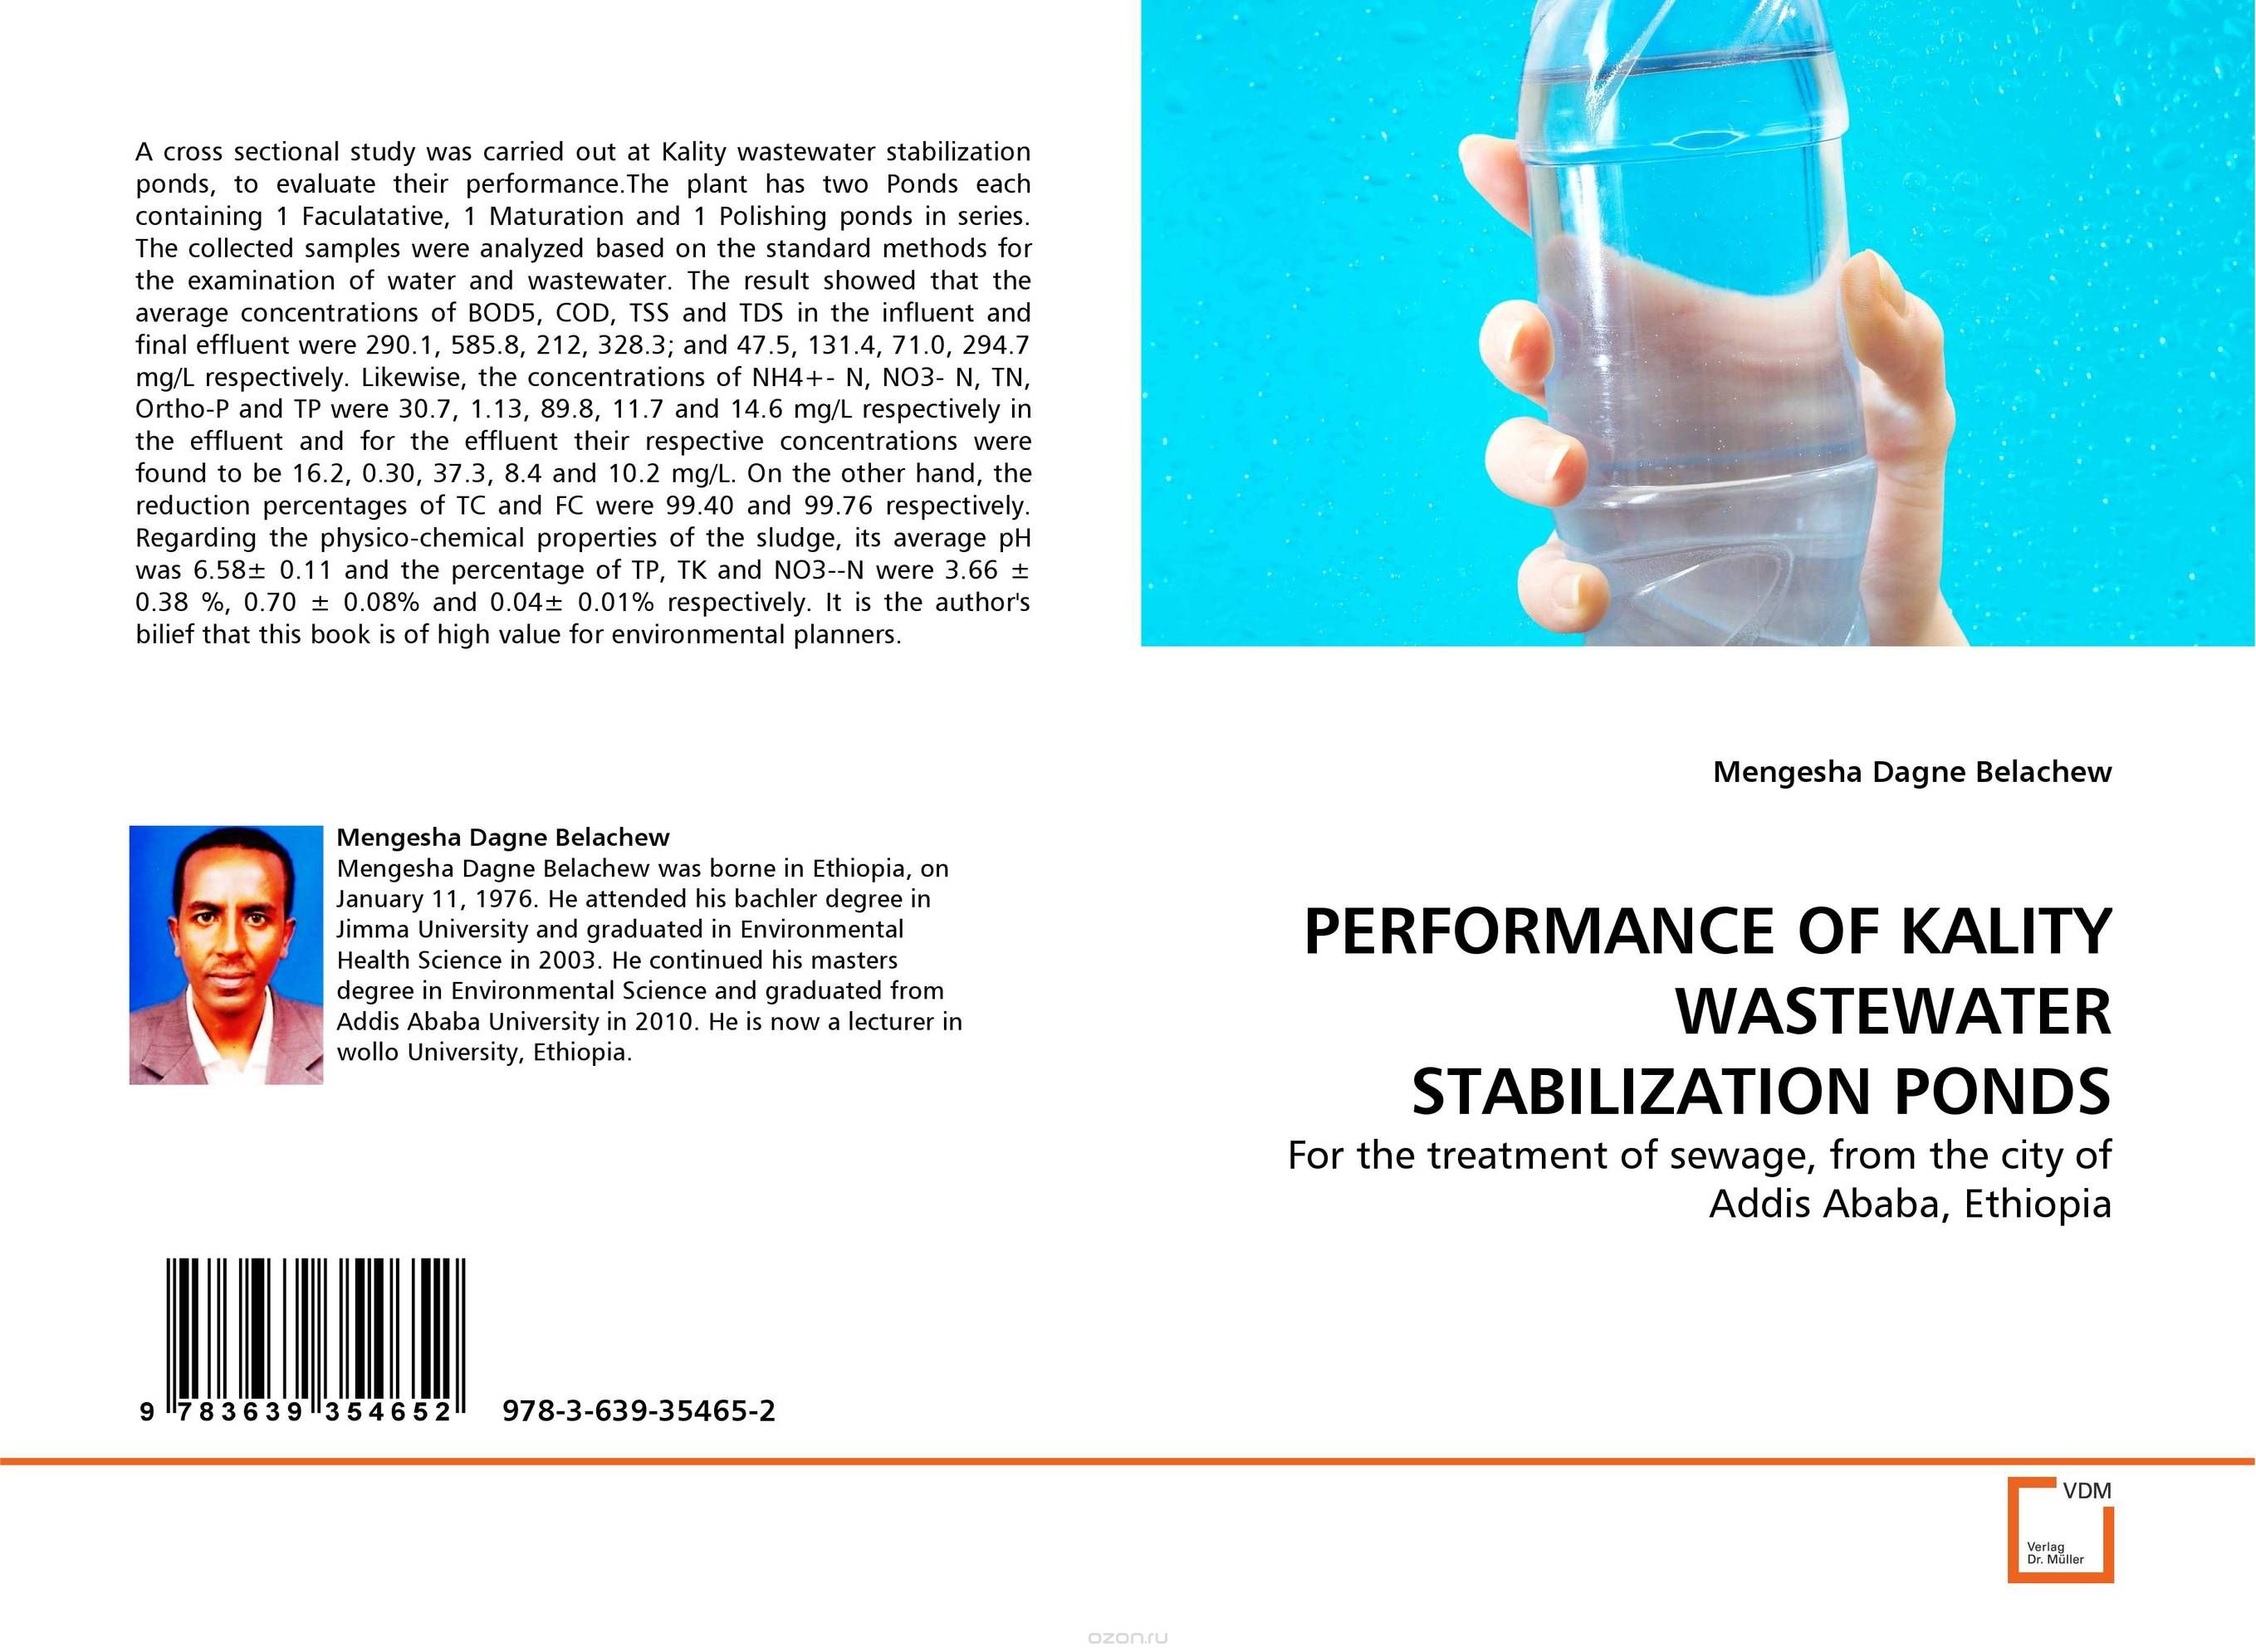 PERFORMANCE OF KALITY WASTEWATER STABILIZATION PONDS